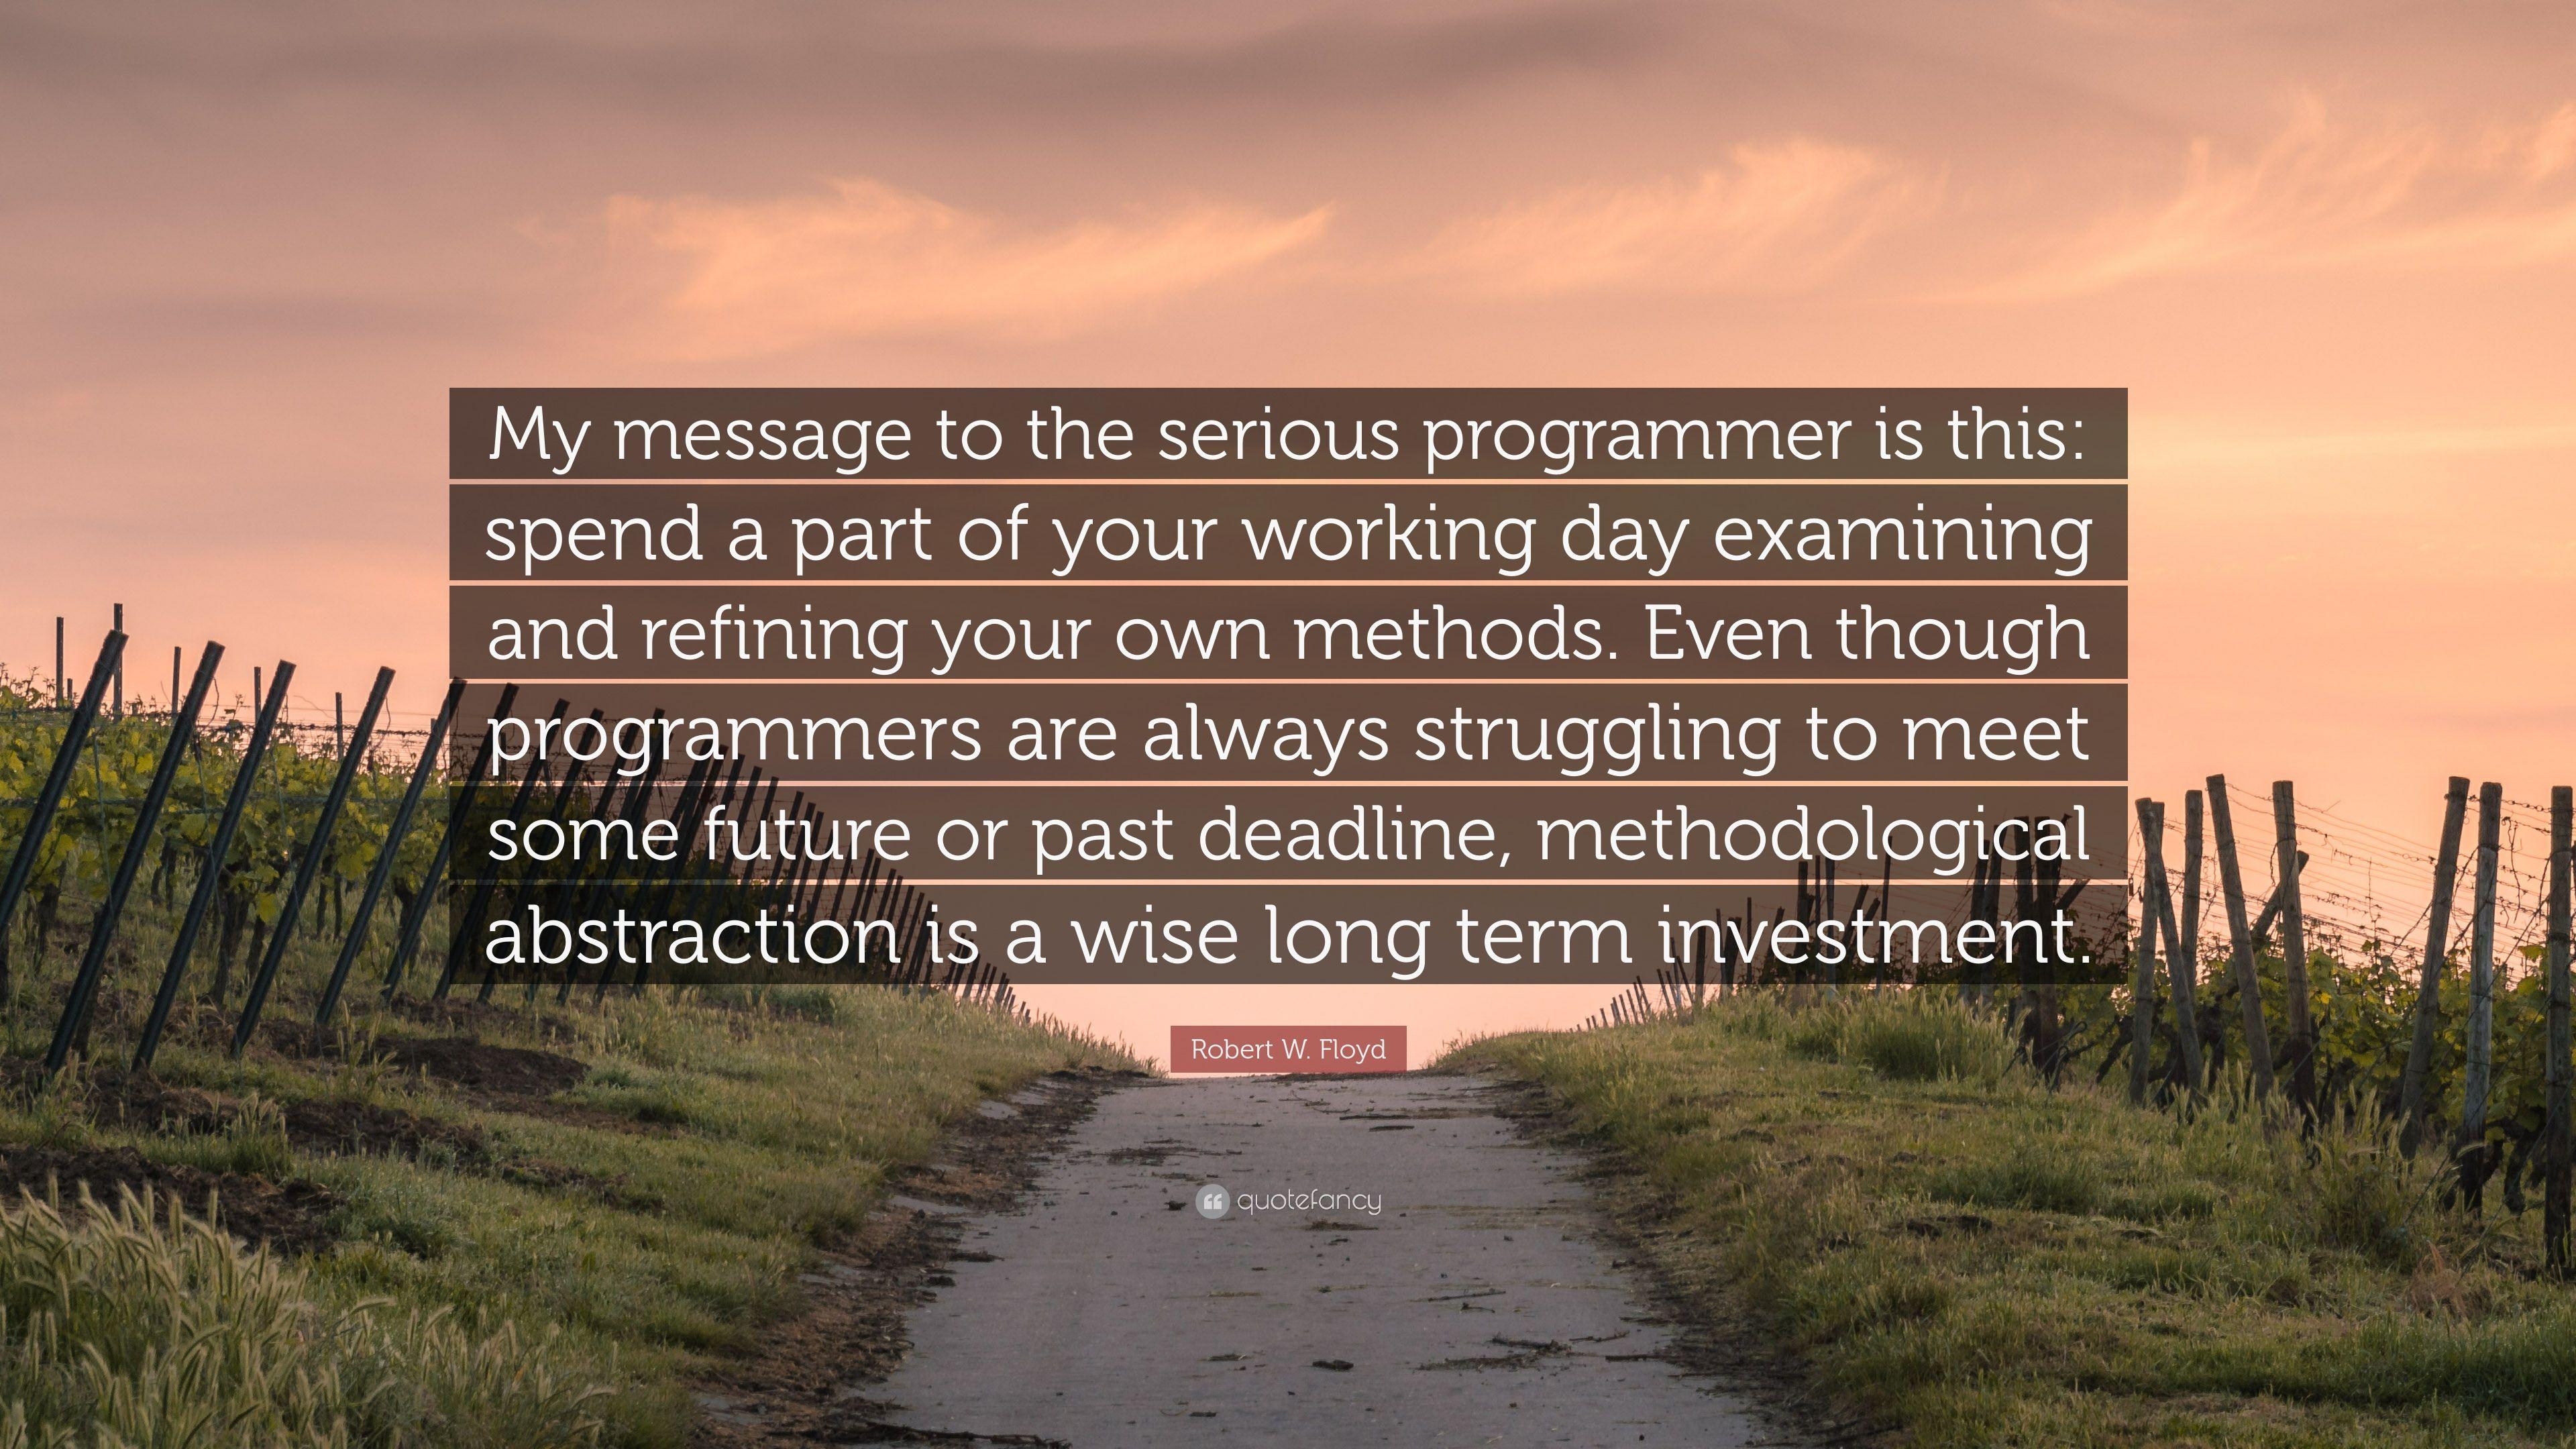 Robert W. Floyd Quote: “My message to the serious programmer is this